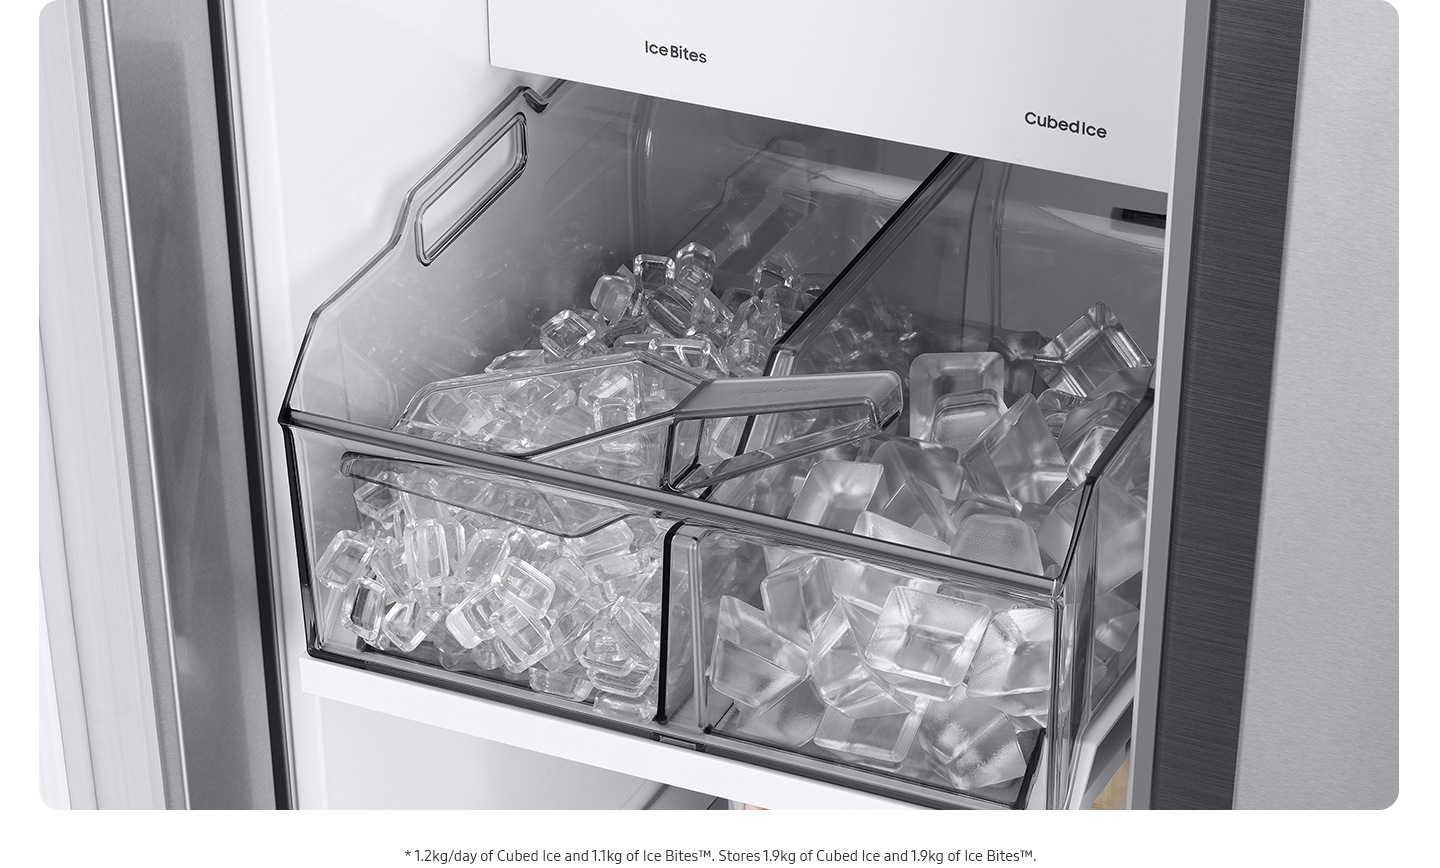 The dual tray in the freezer is full of ice. The left tray is full of large ice cubes and the right tray is full of small ice cubes.